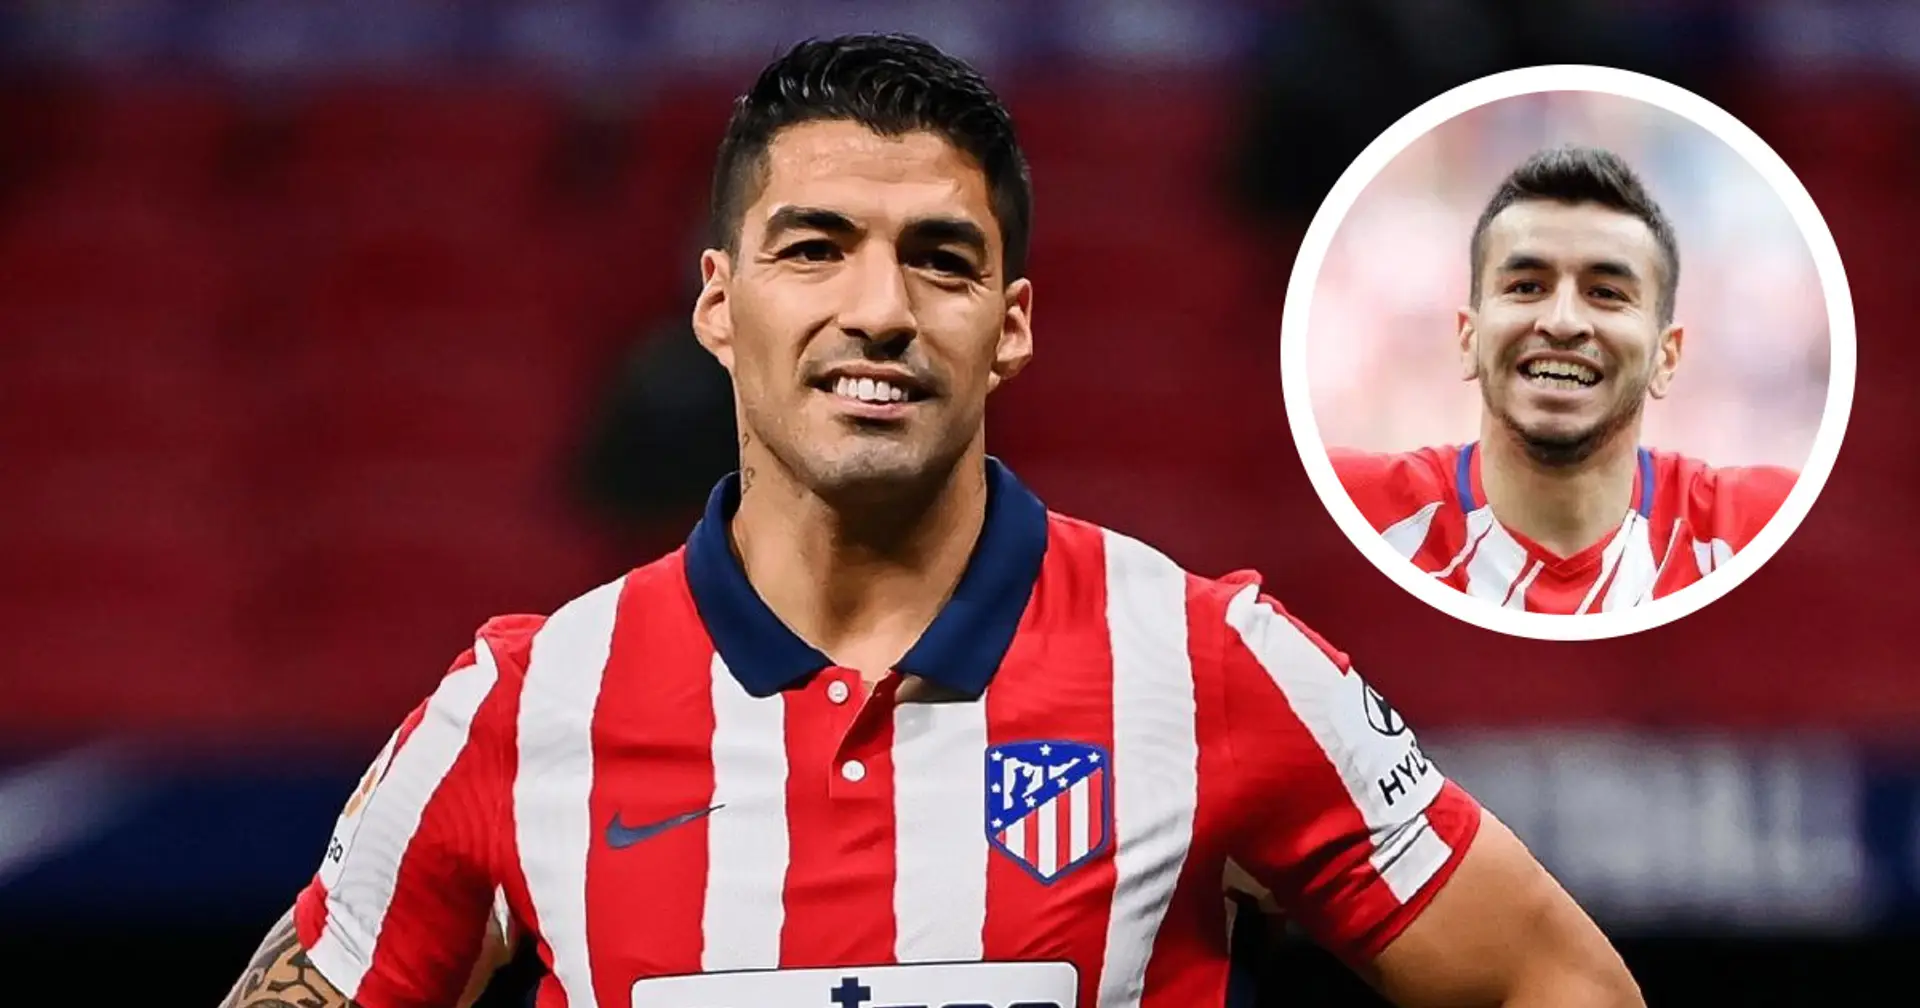 'They did things wrong': Atletico's Correa wondering how on earth Barca let 'incredible' Suarez leave